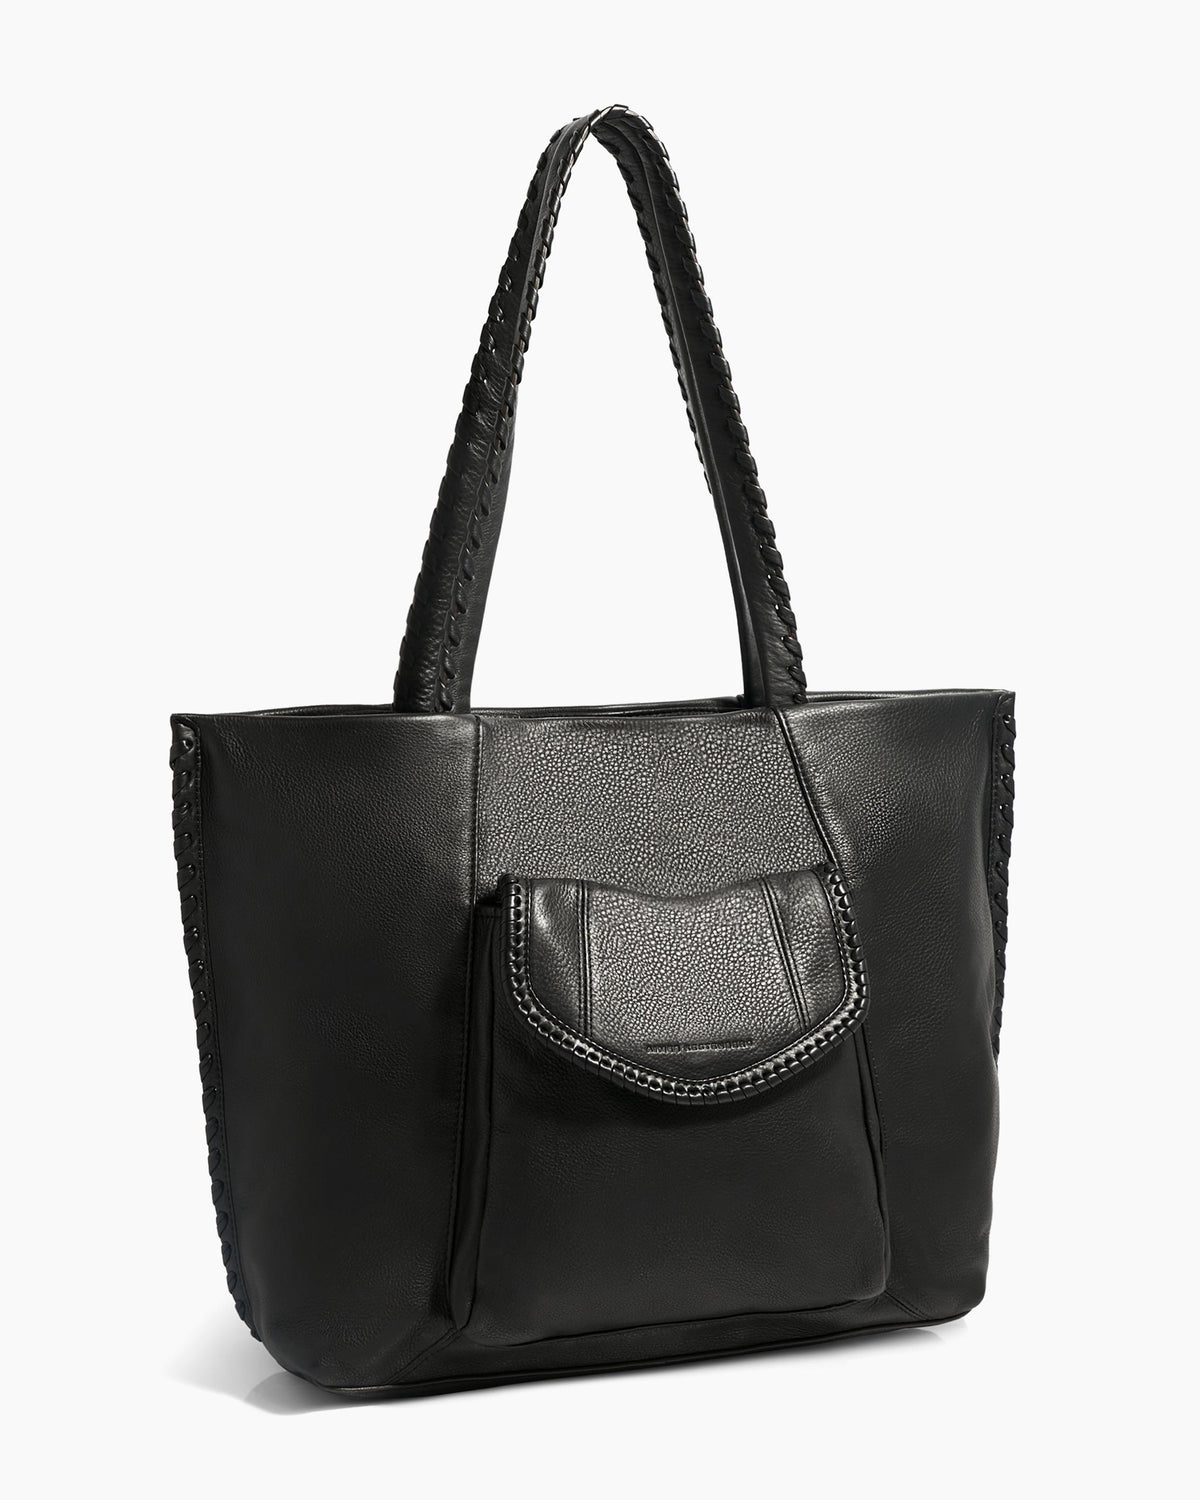 All for Love Tote